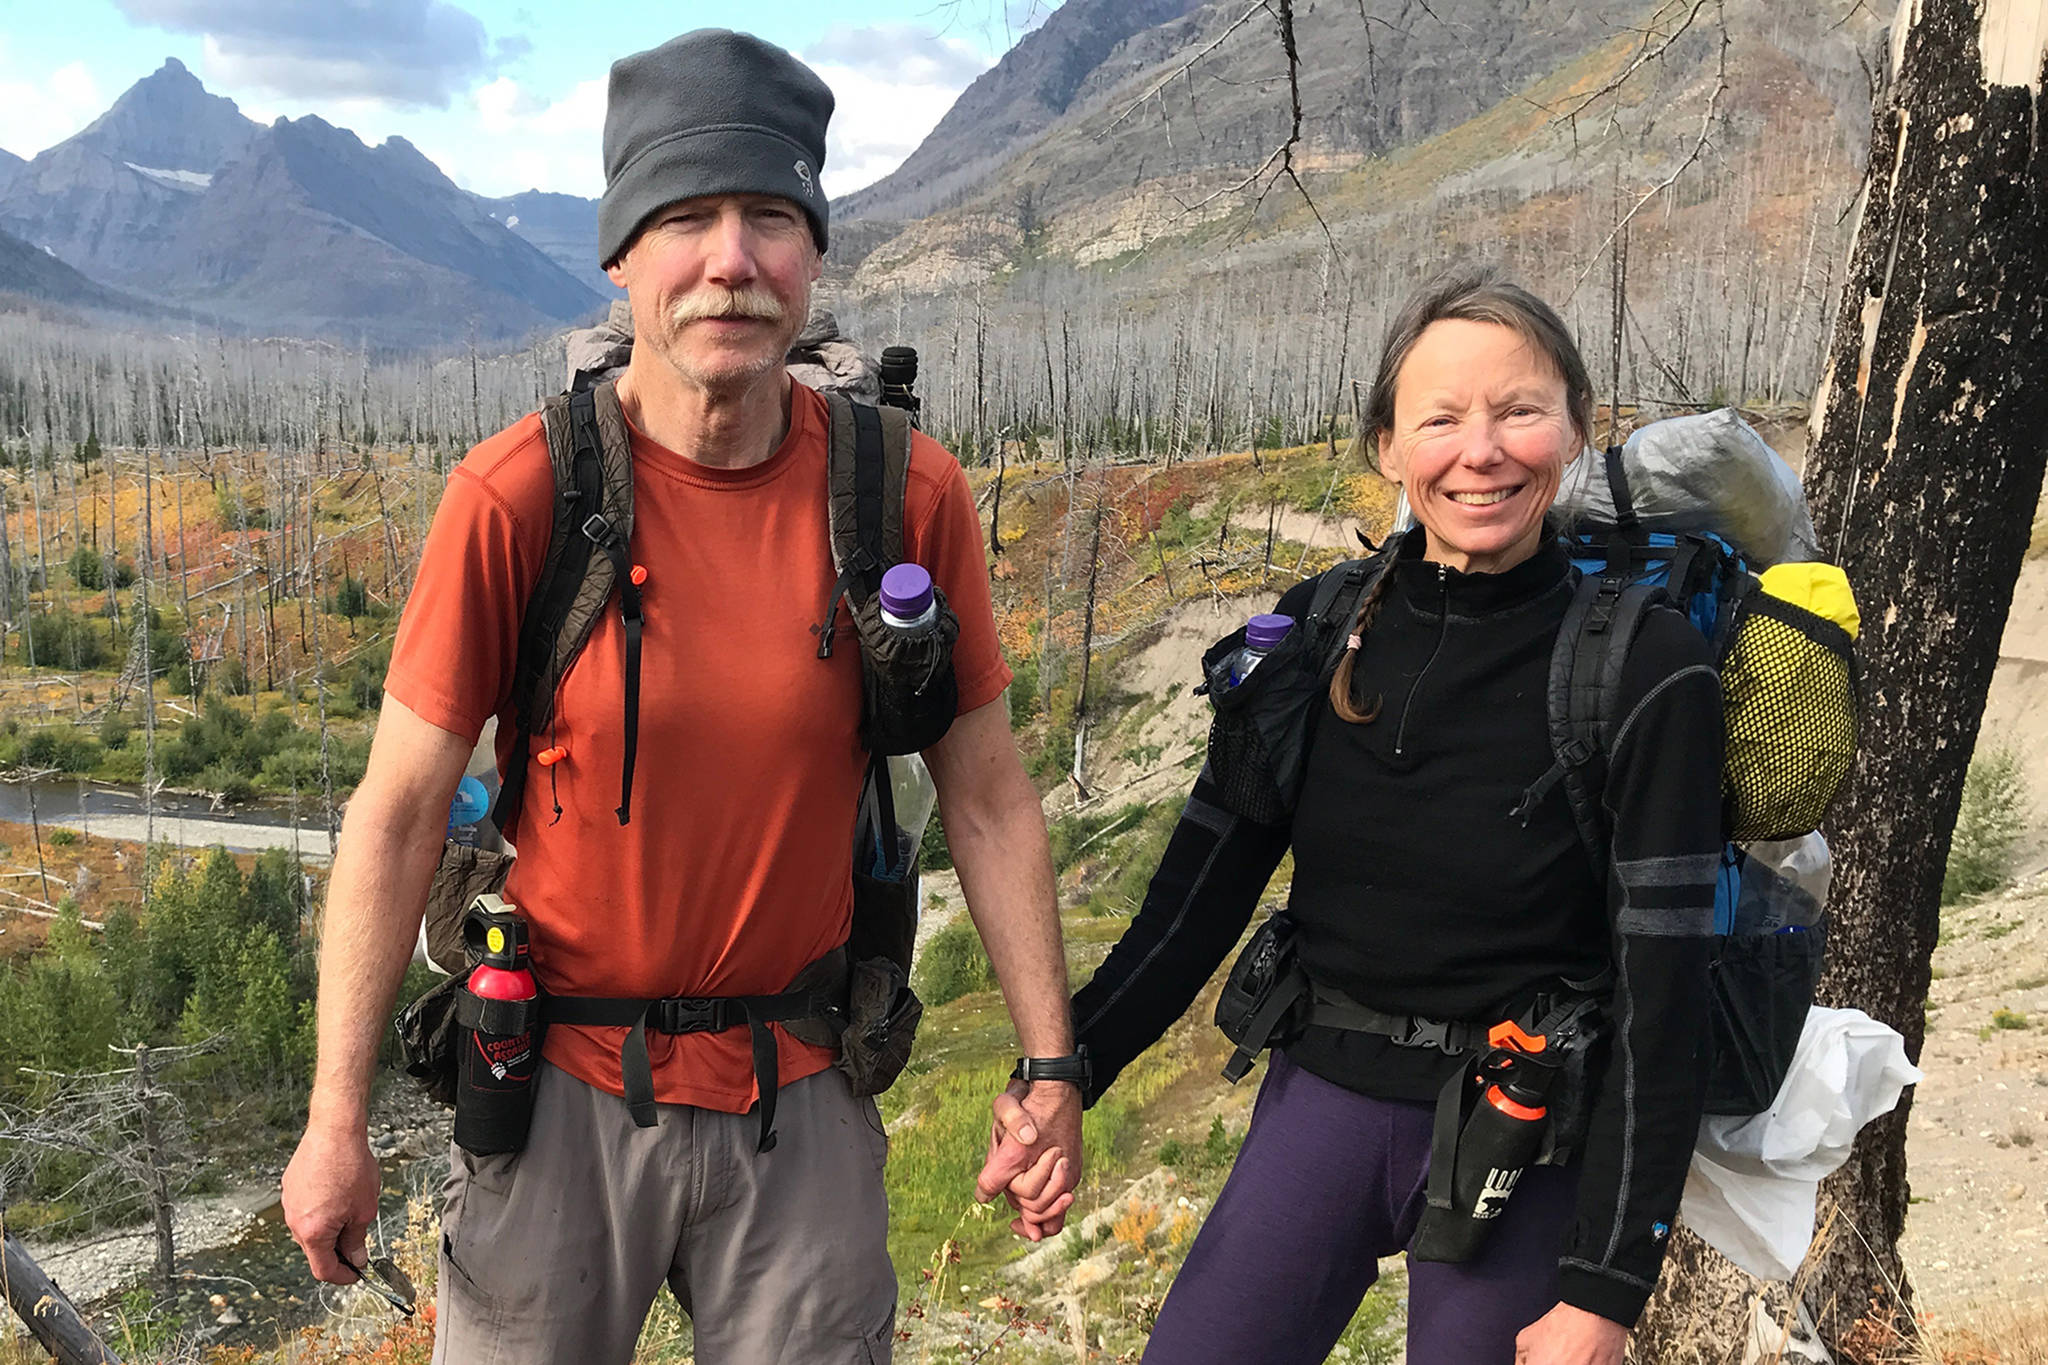 Jeff Sauer and his wife, Theresa Svancara, stop for a picture in Glacier National Park in Montana while hiking the Continental Divide Trail in September 2018. (Photo courtesy Jeff Sauer)